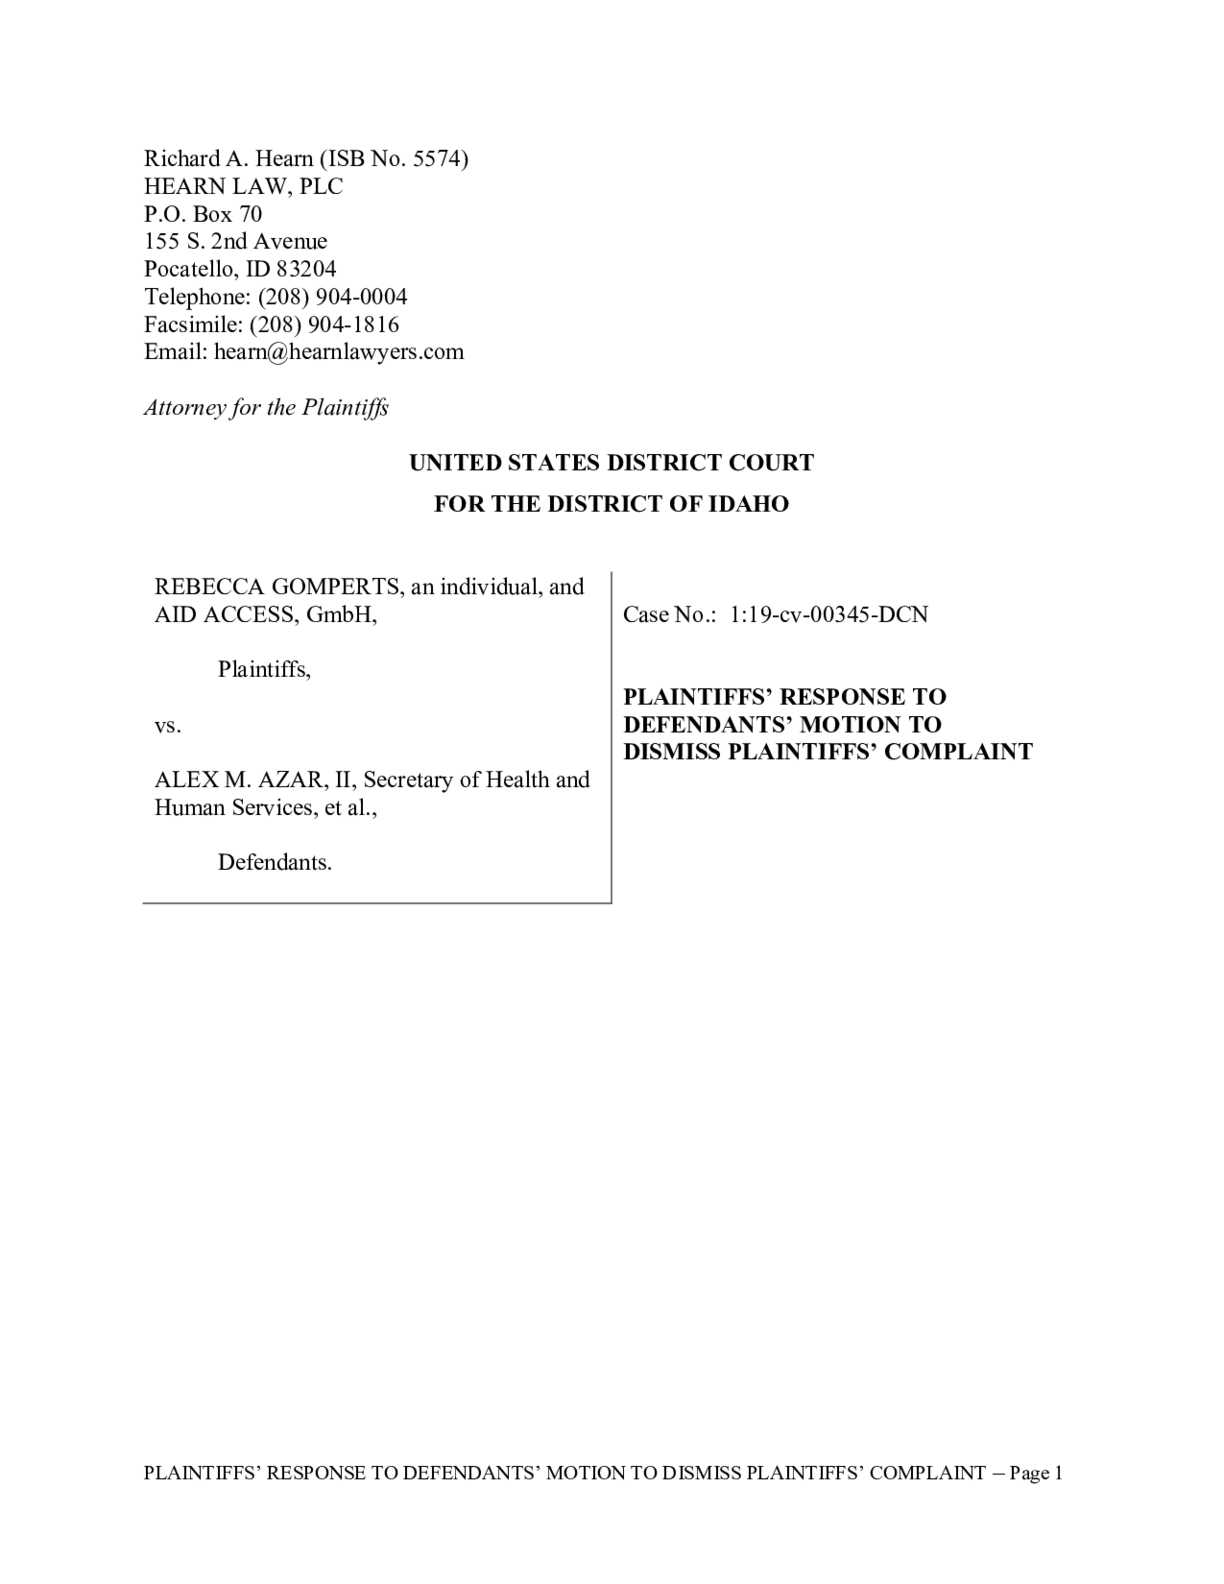 19-12-2019 Dr Gomperts response to motion to dismiss